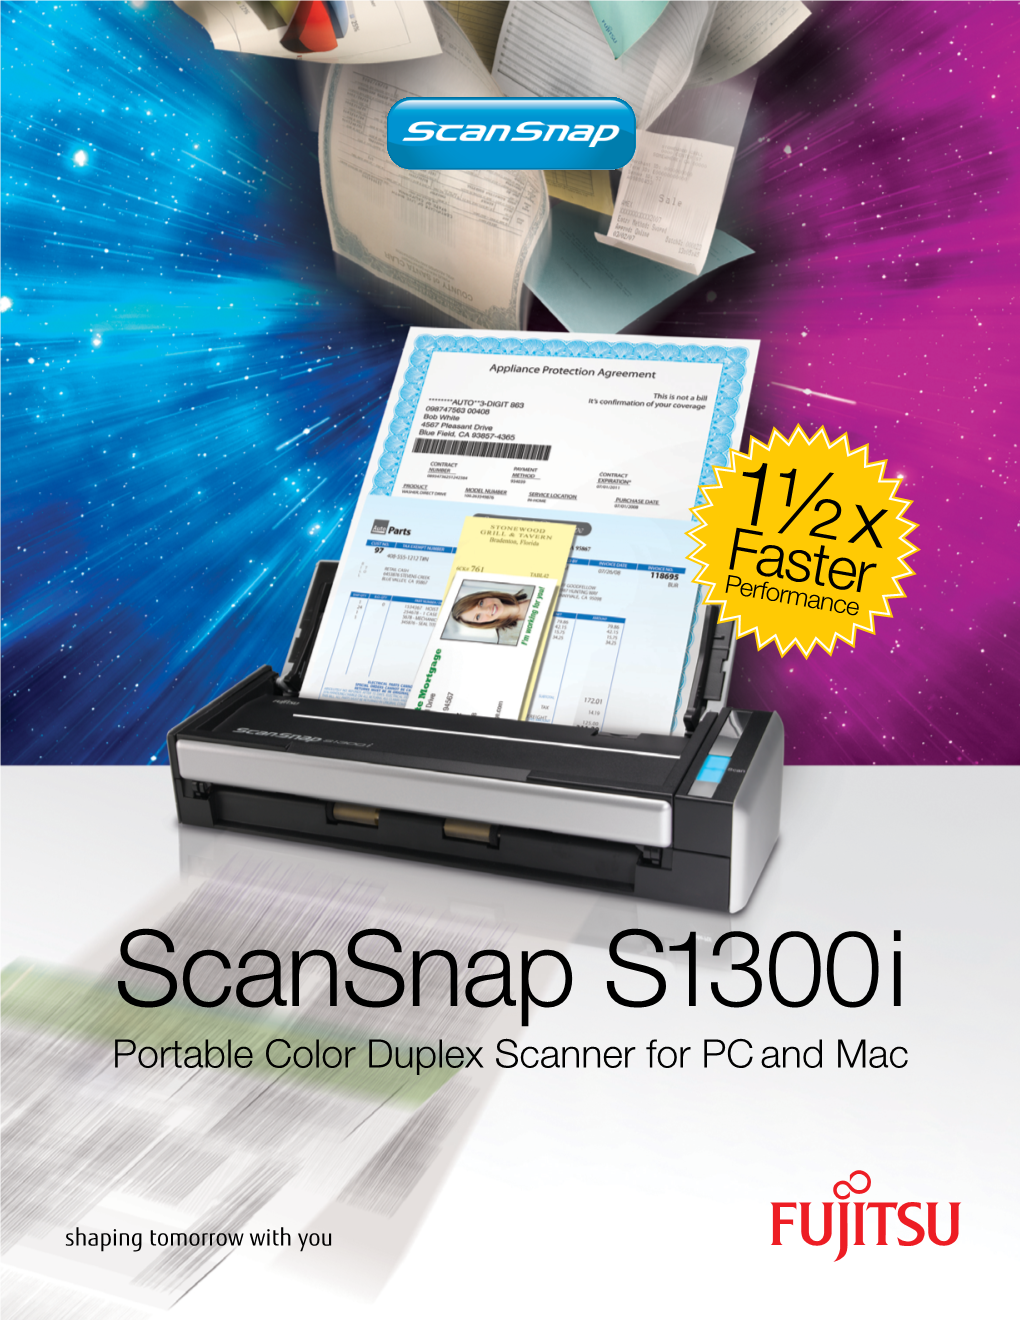 Scansnap S1300i Portable Color Duplex Scanner for PC and Mac Stack